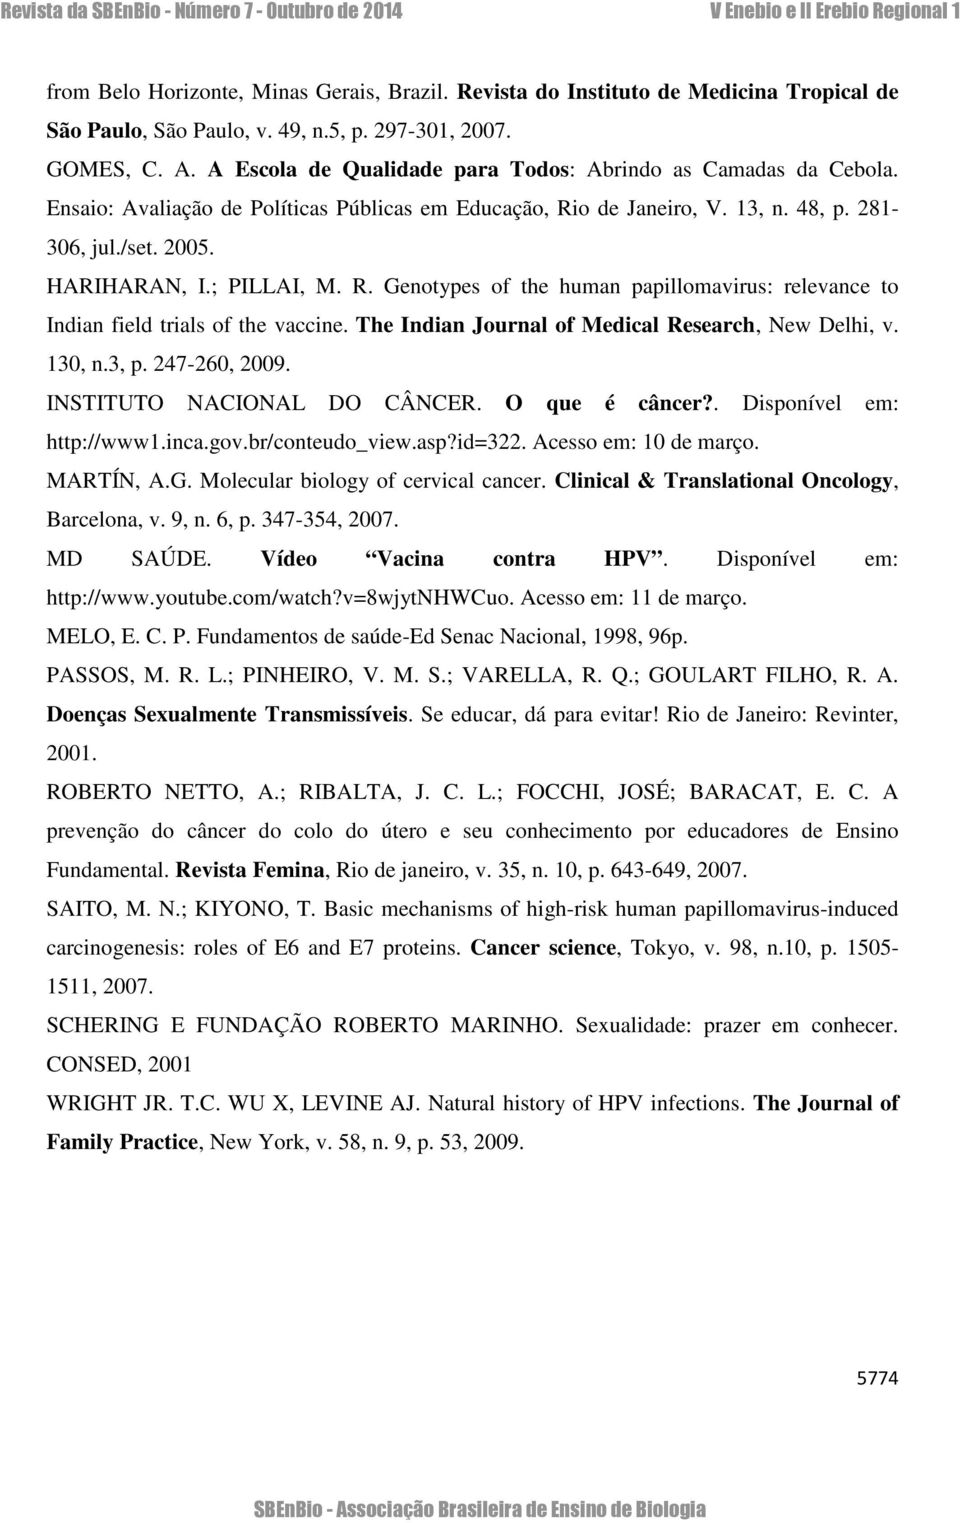 R. Genotypes of the human papillomavirus: relevance to Indian field trials of the vaccine. The Indian Journal of Medical Research, New Delhi, v. 130, n.3, p. 247-260, 2009.